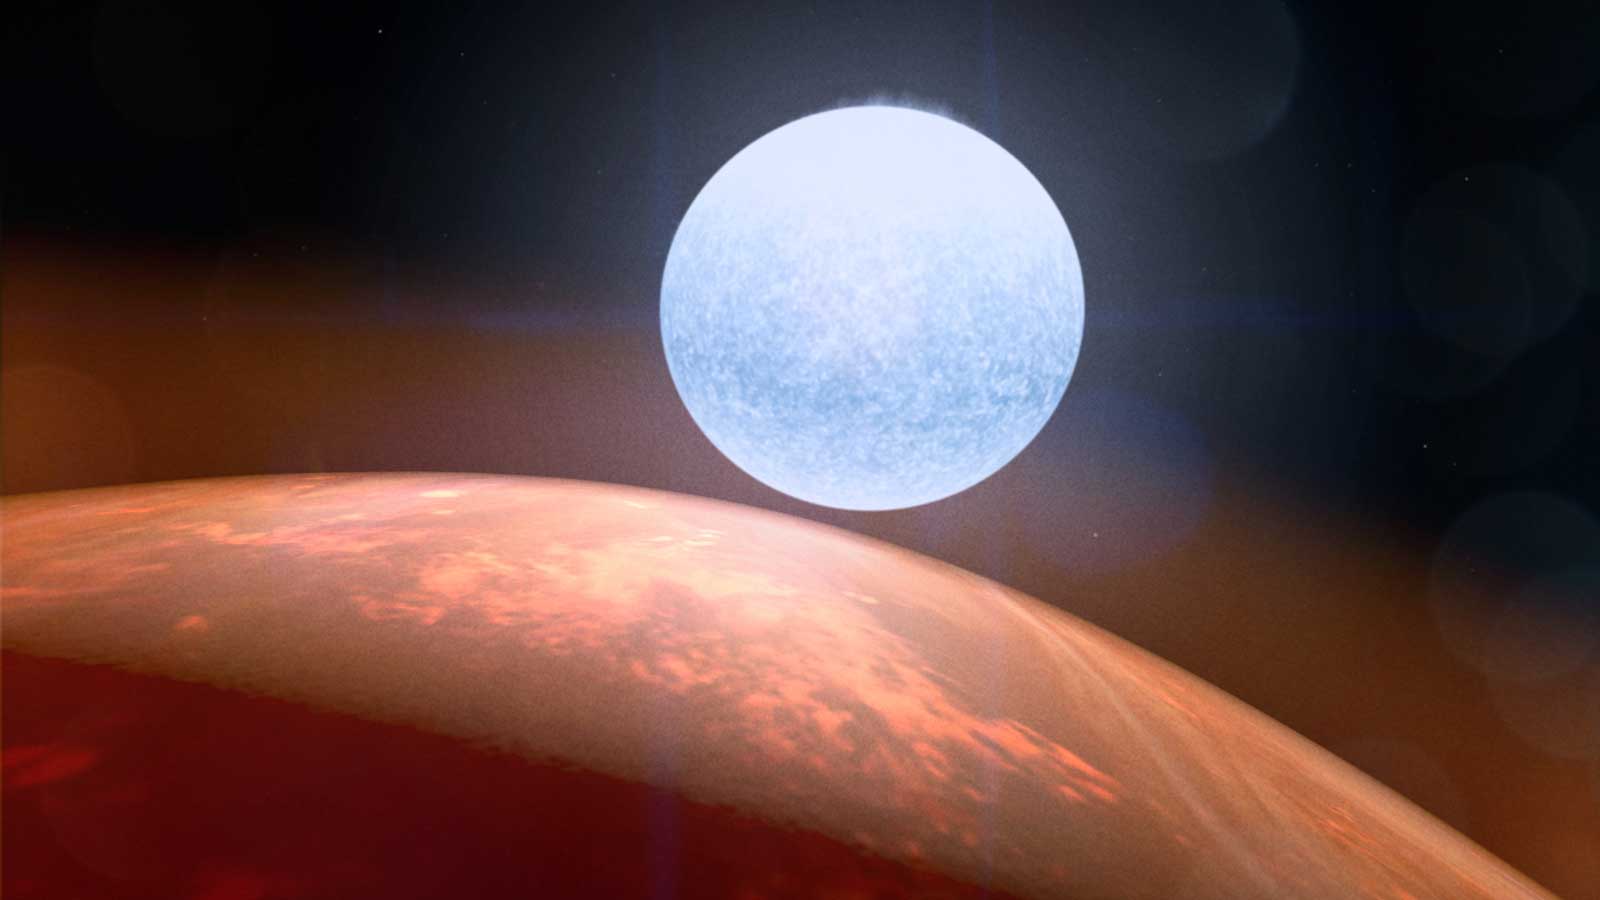 slide 1 - A large red exoplanet is seen with a white hot star